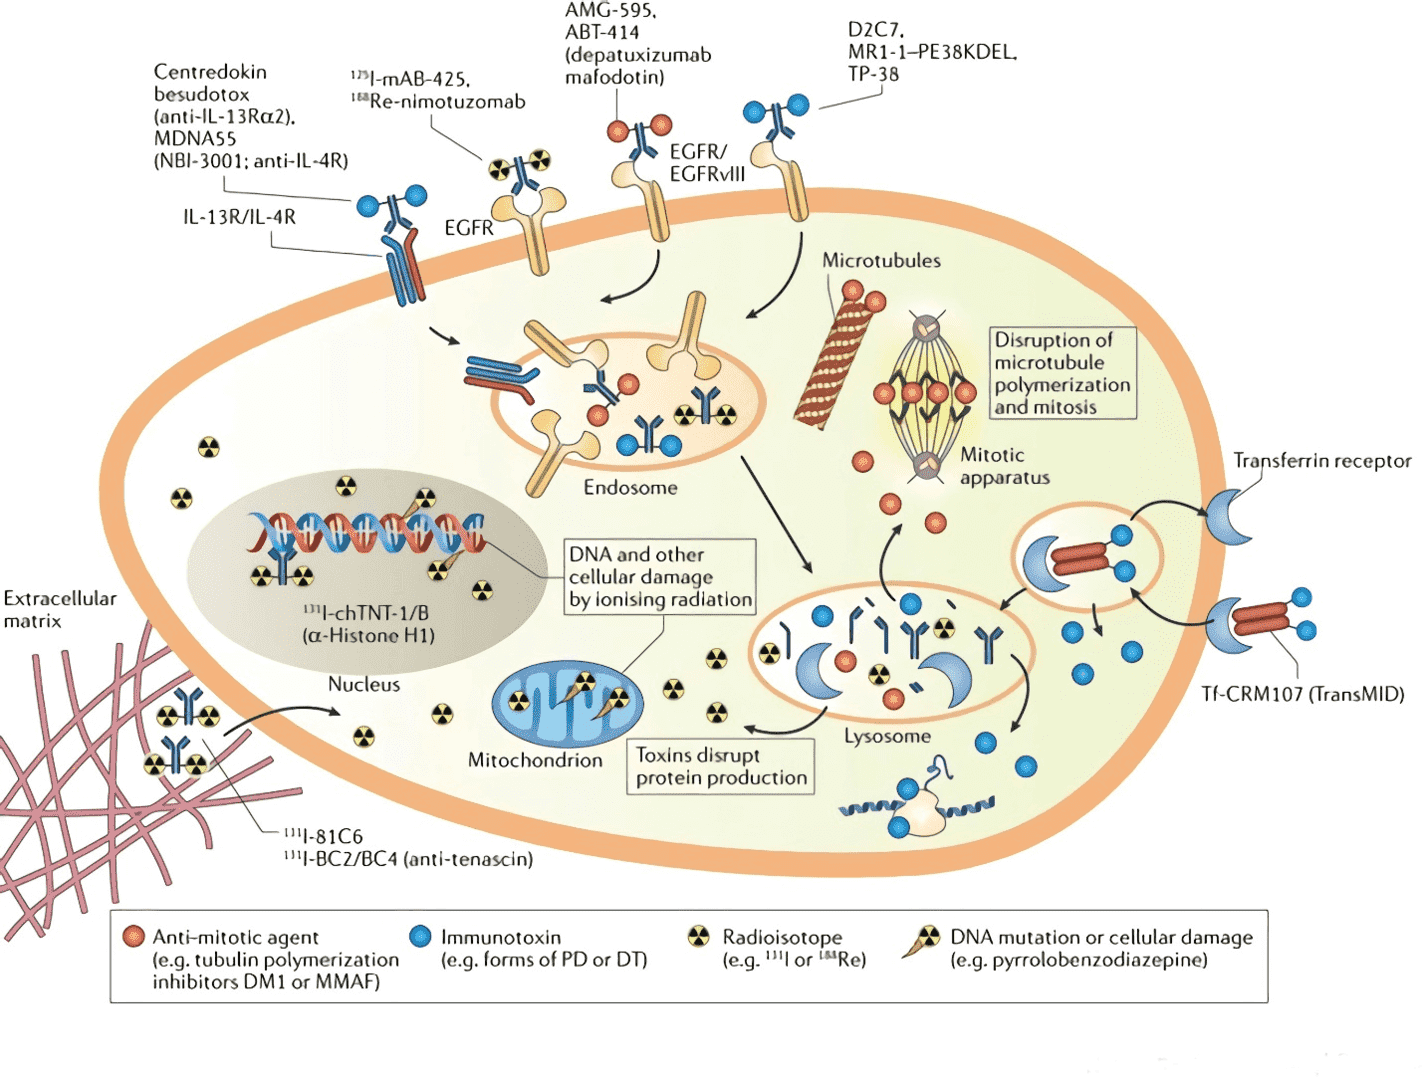 ADC therapies and their mechanisms of action.